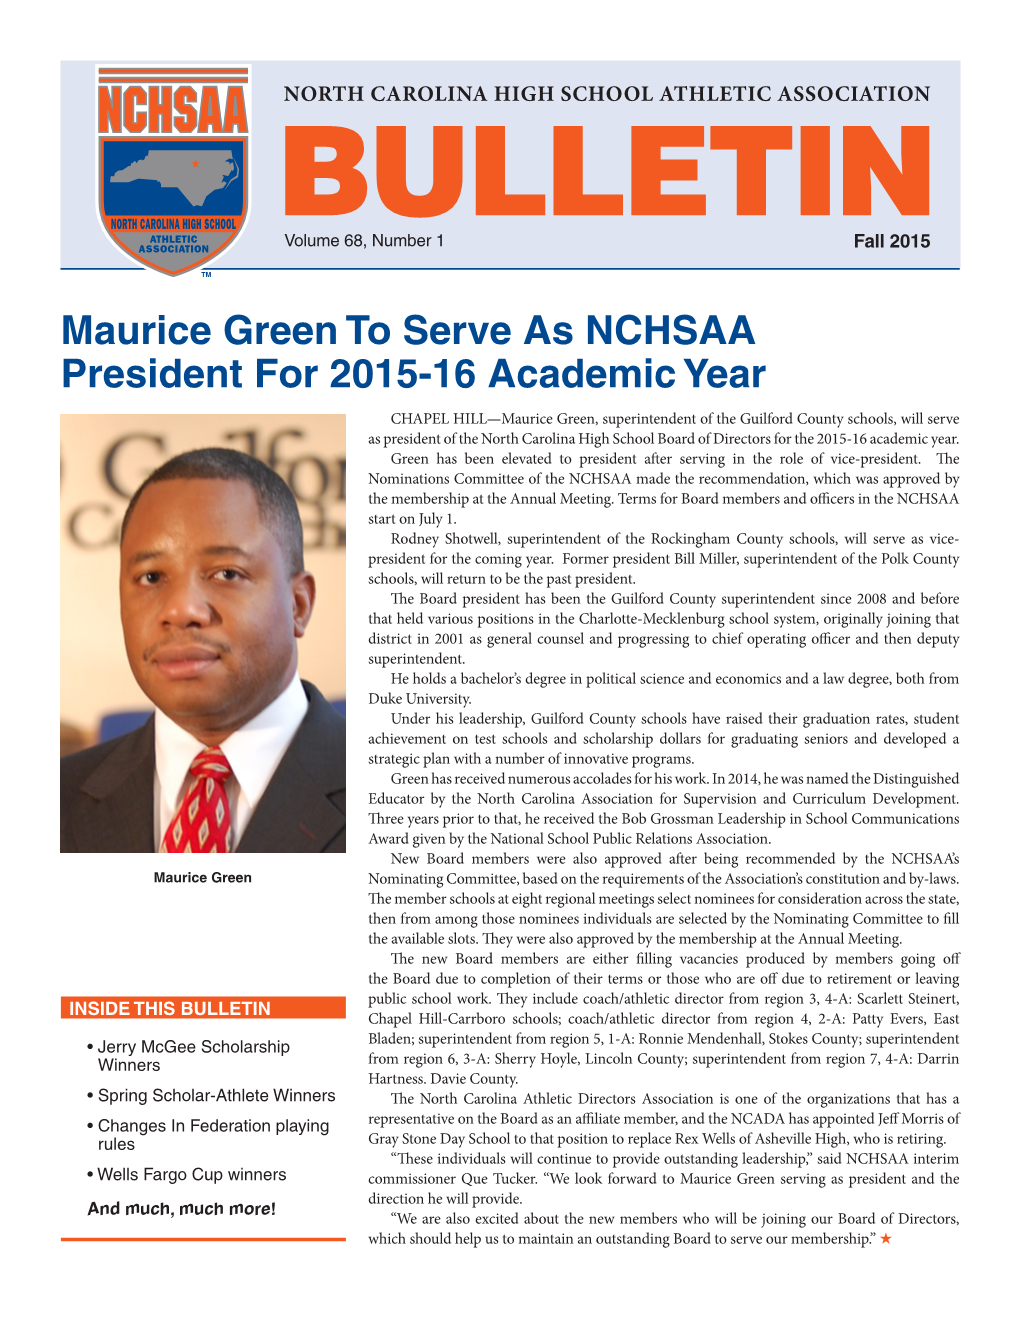 Maurice Green to Serve As NCHSAA President for 2015-16 Academic Year